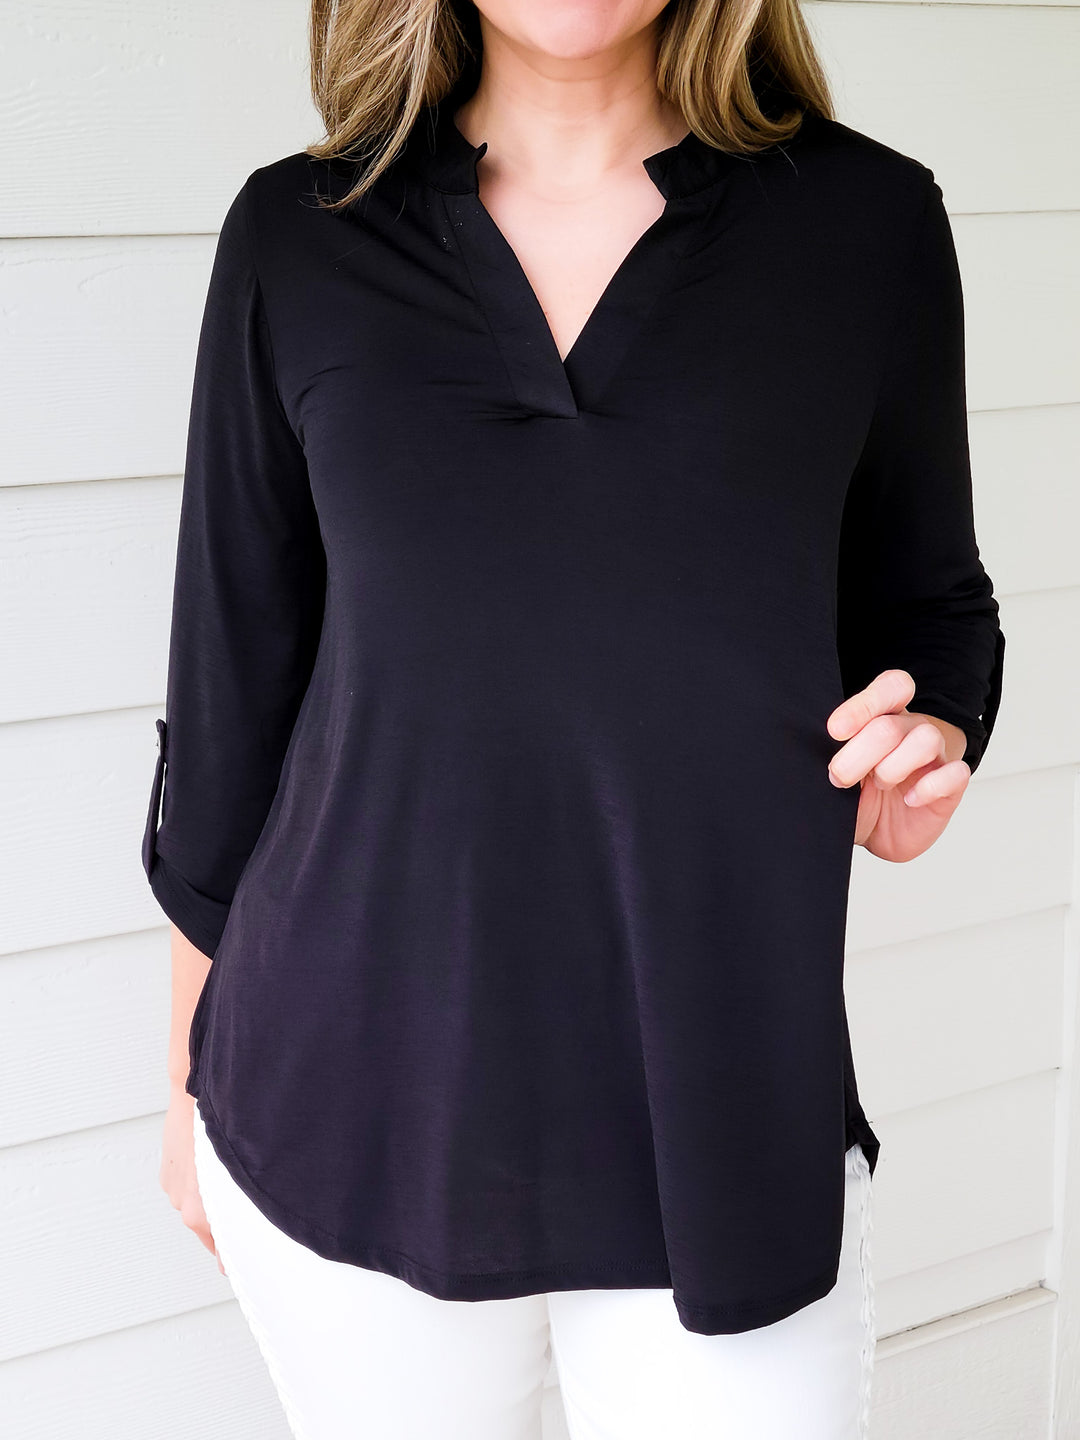 SOLID STRETCHY LIZZY  TOP - BLACK